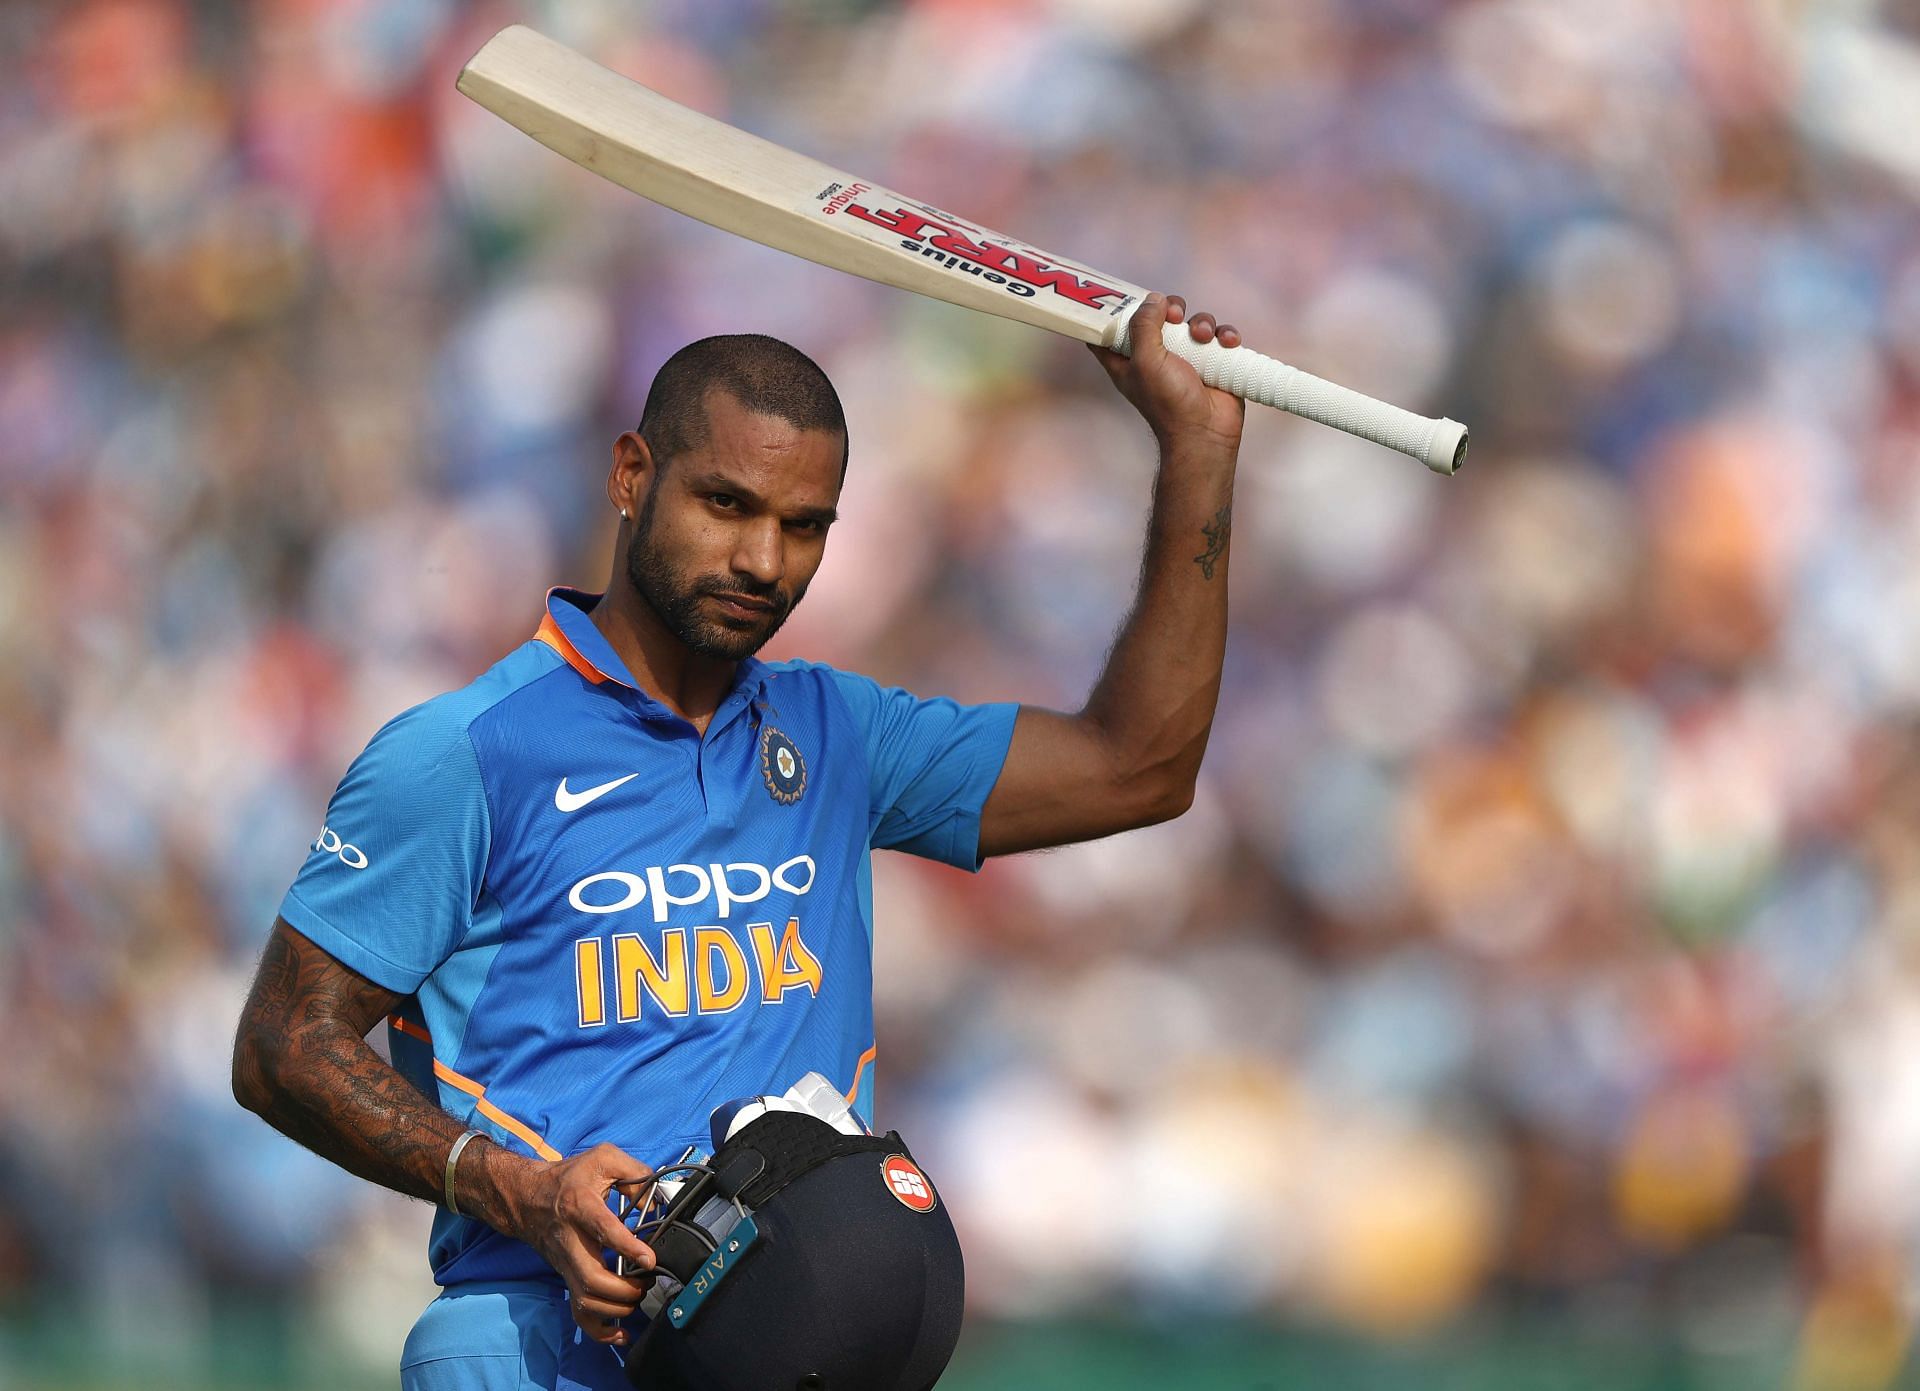 Indian opening batter Shikhar Dhawan has announced the launch of his NFT collection.